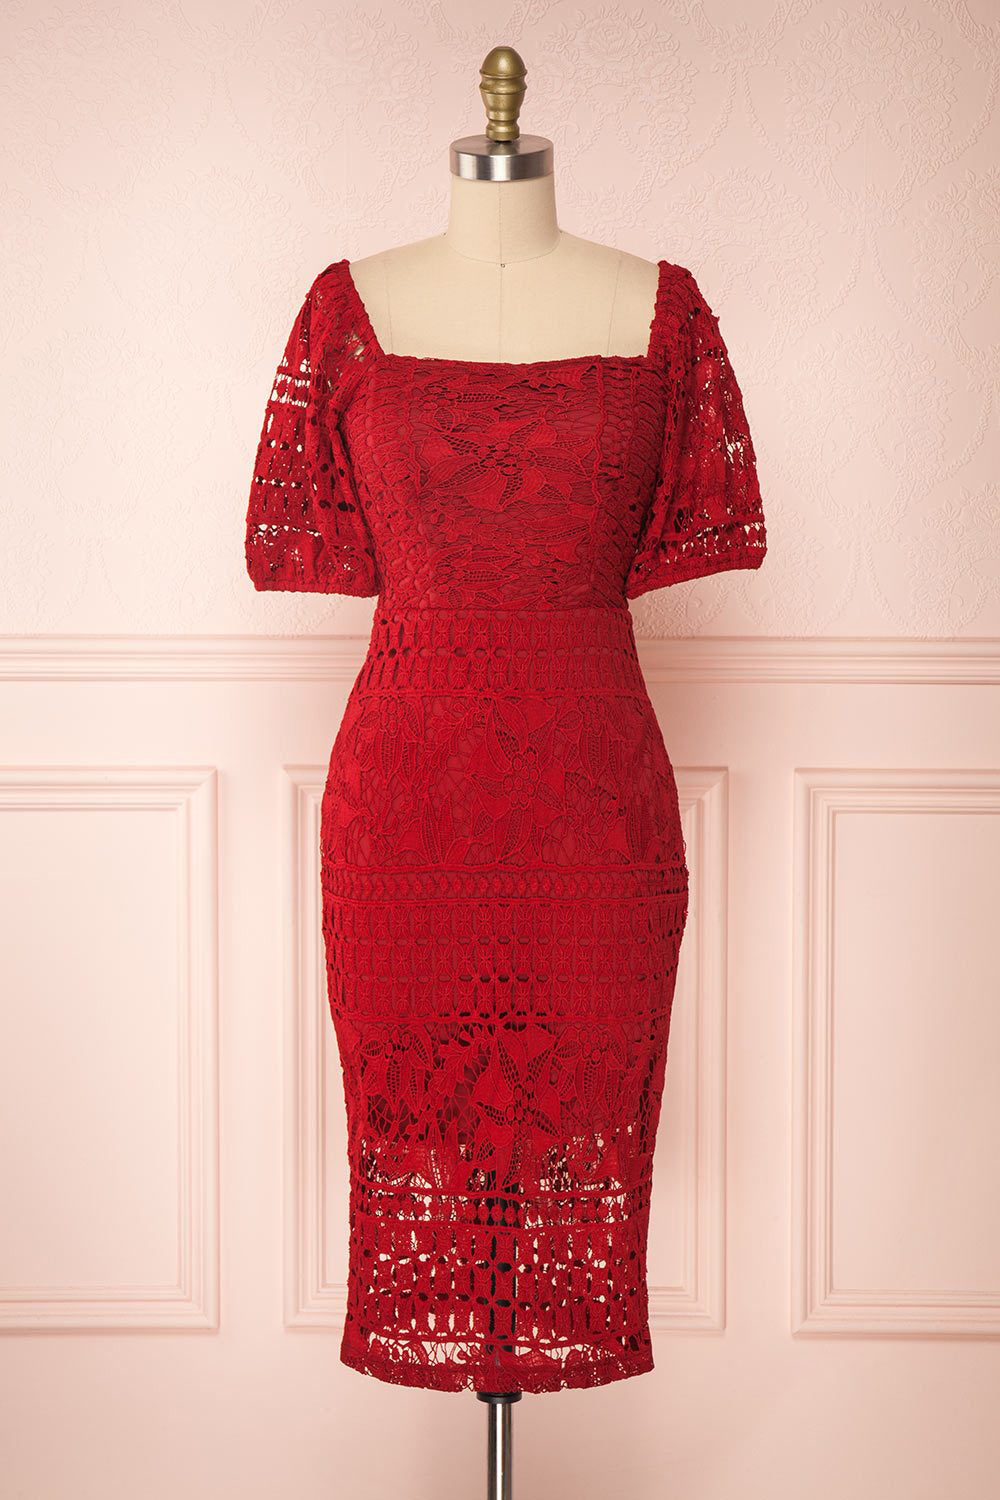 Daphnee Rouge Red Lace Fitted Cocktail Dress | Boutique 1861